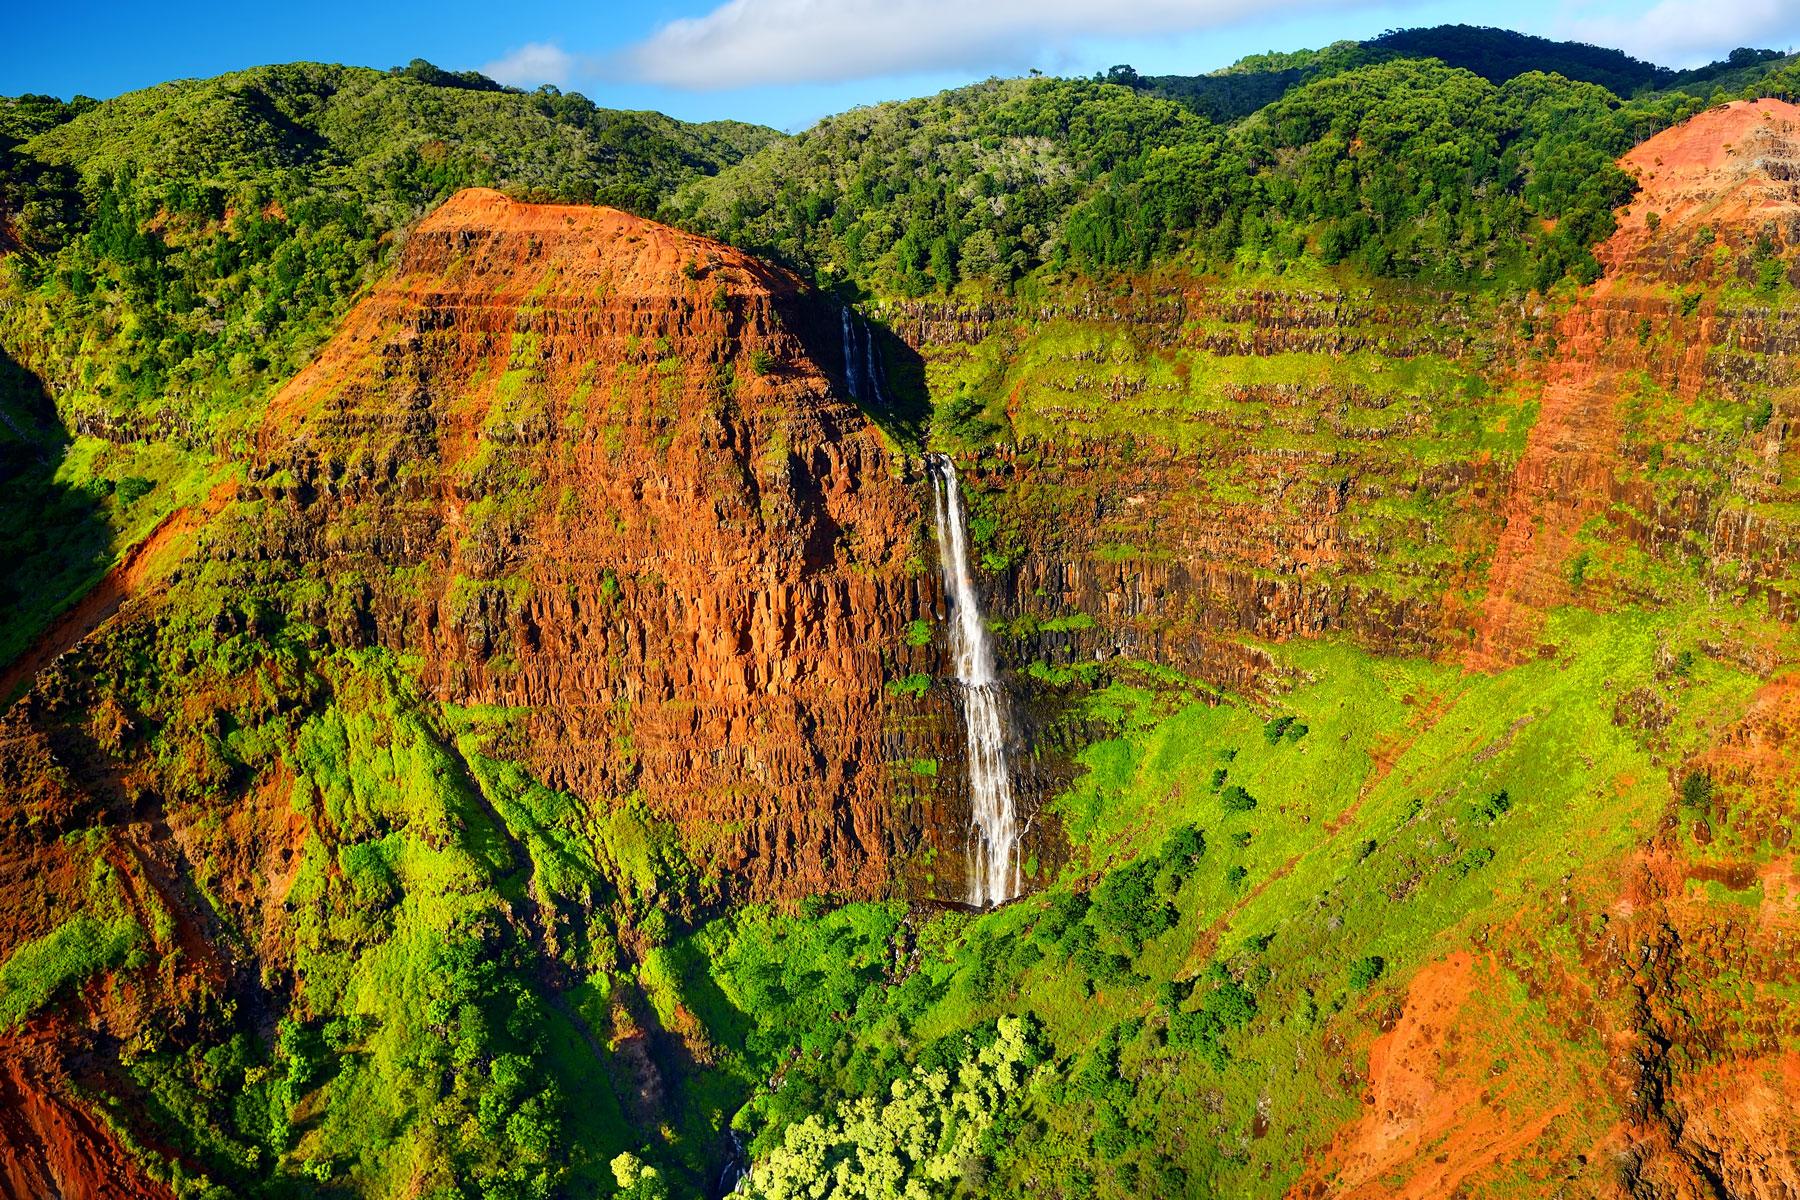 These Are the Best Things to See and Do in Kauai, Hawaii